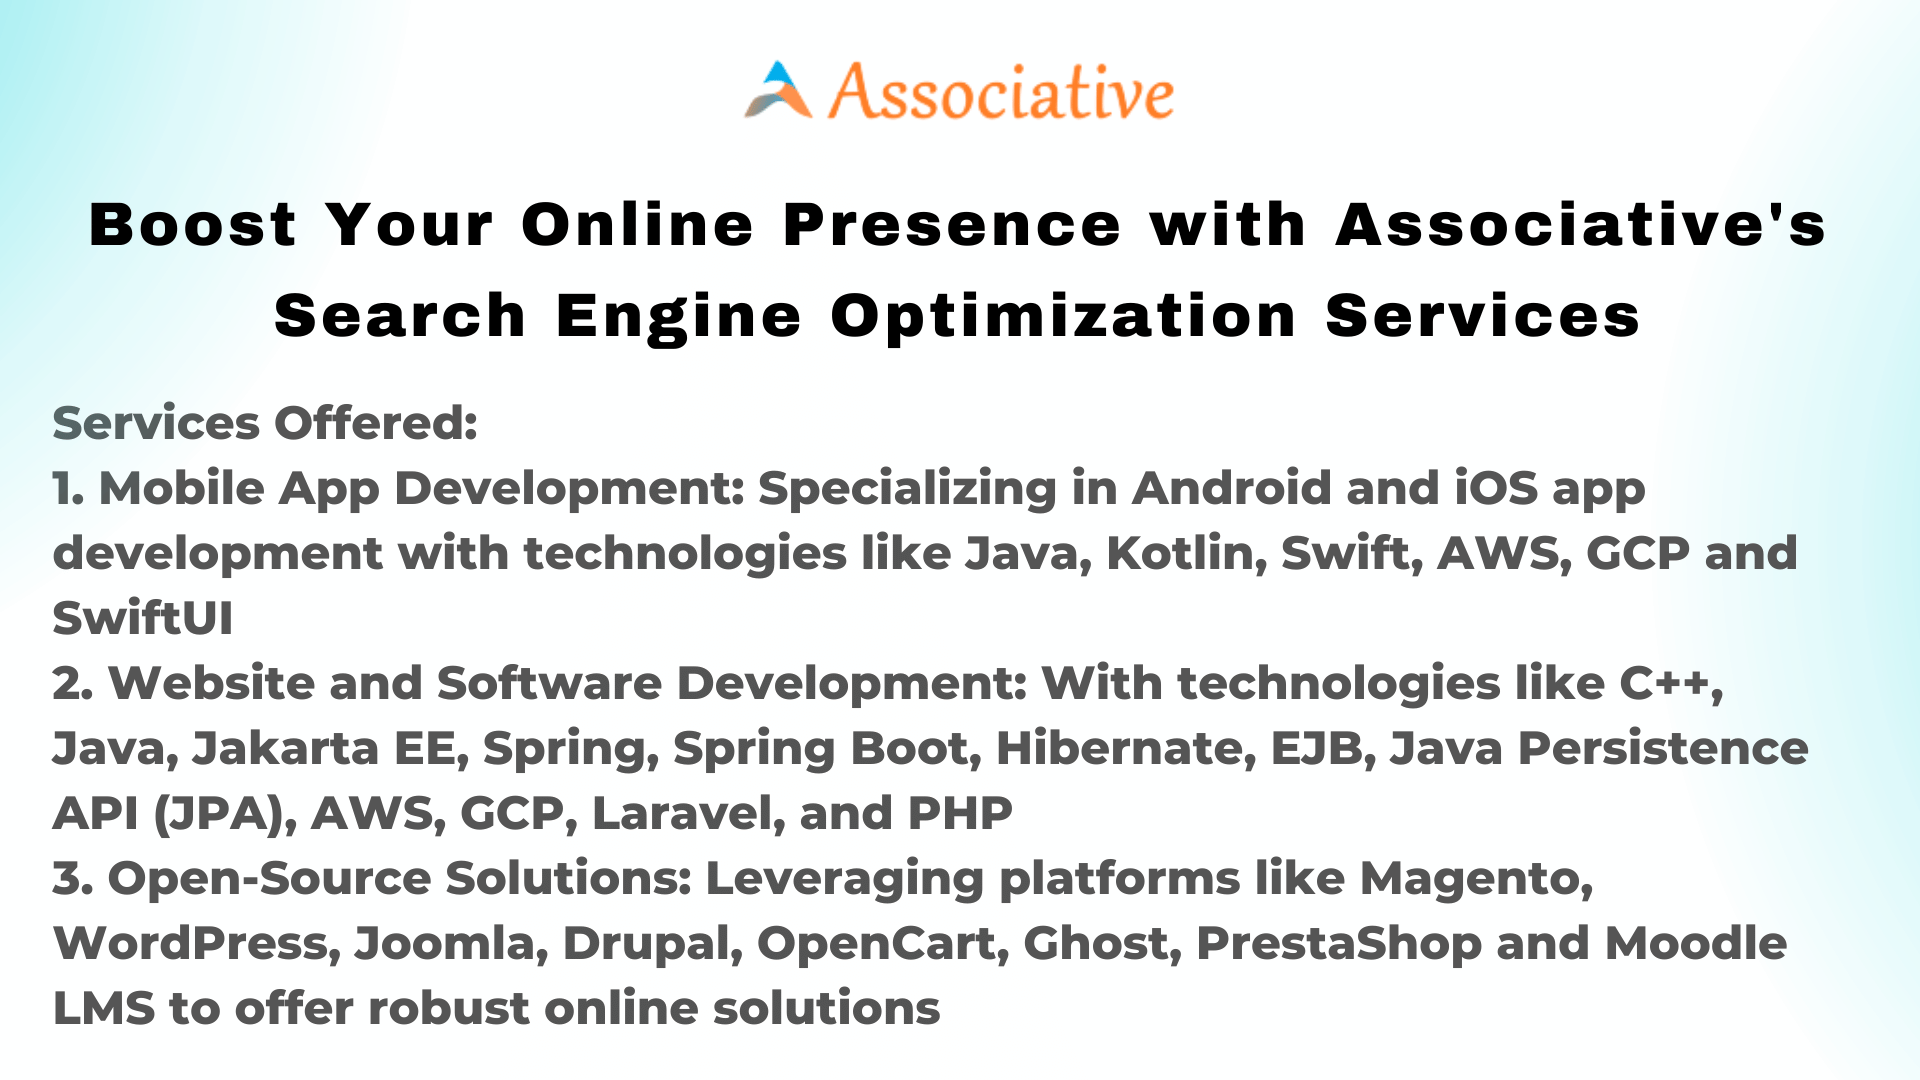 Boost Your Online Presence with Associative's Search Engine Optimization Services